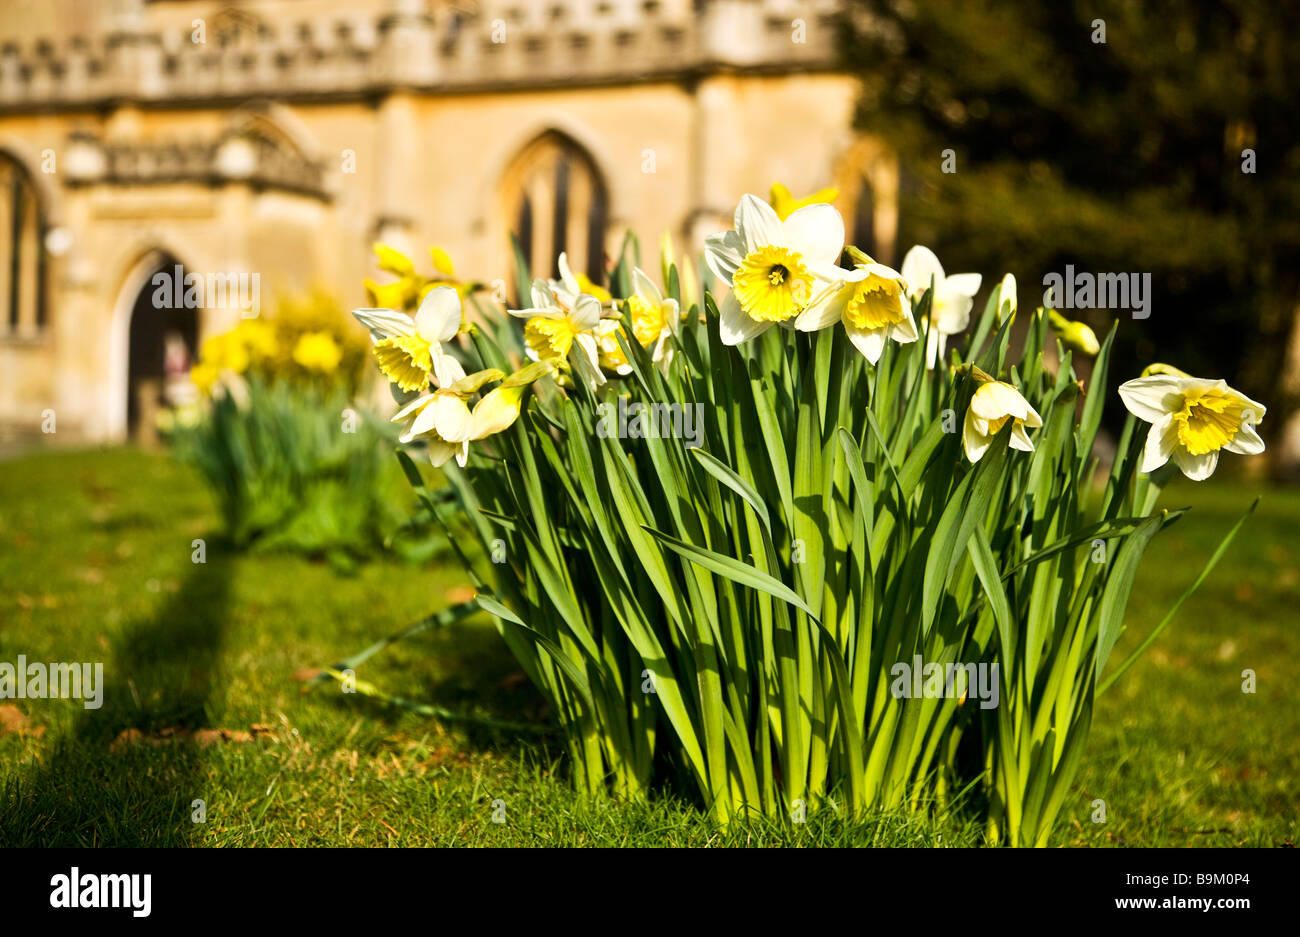 A clump of daffodils growing in front of St Lawrence's Church in Hungerford Berkshire England UK on a sunny spring day Stock Photo